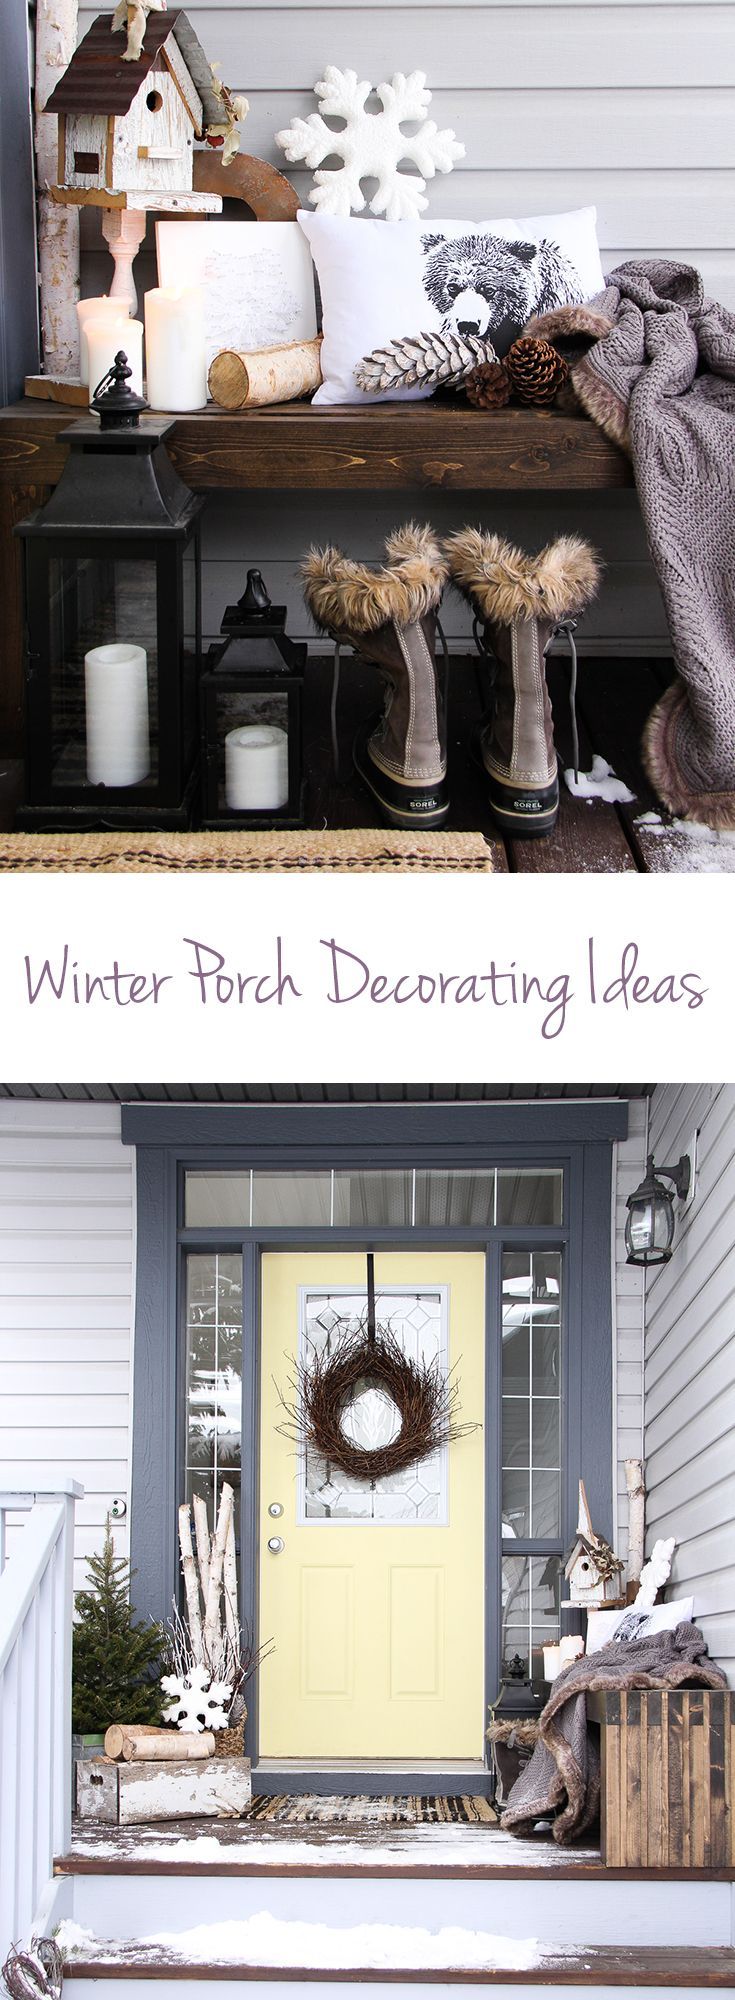 Decorating the Porch for Winter